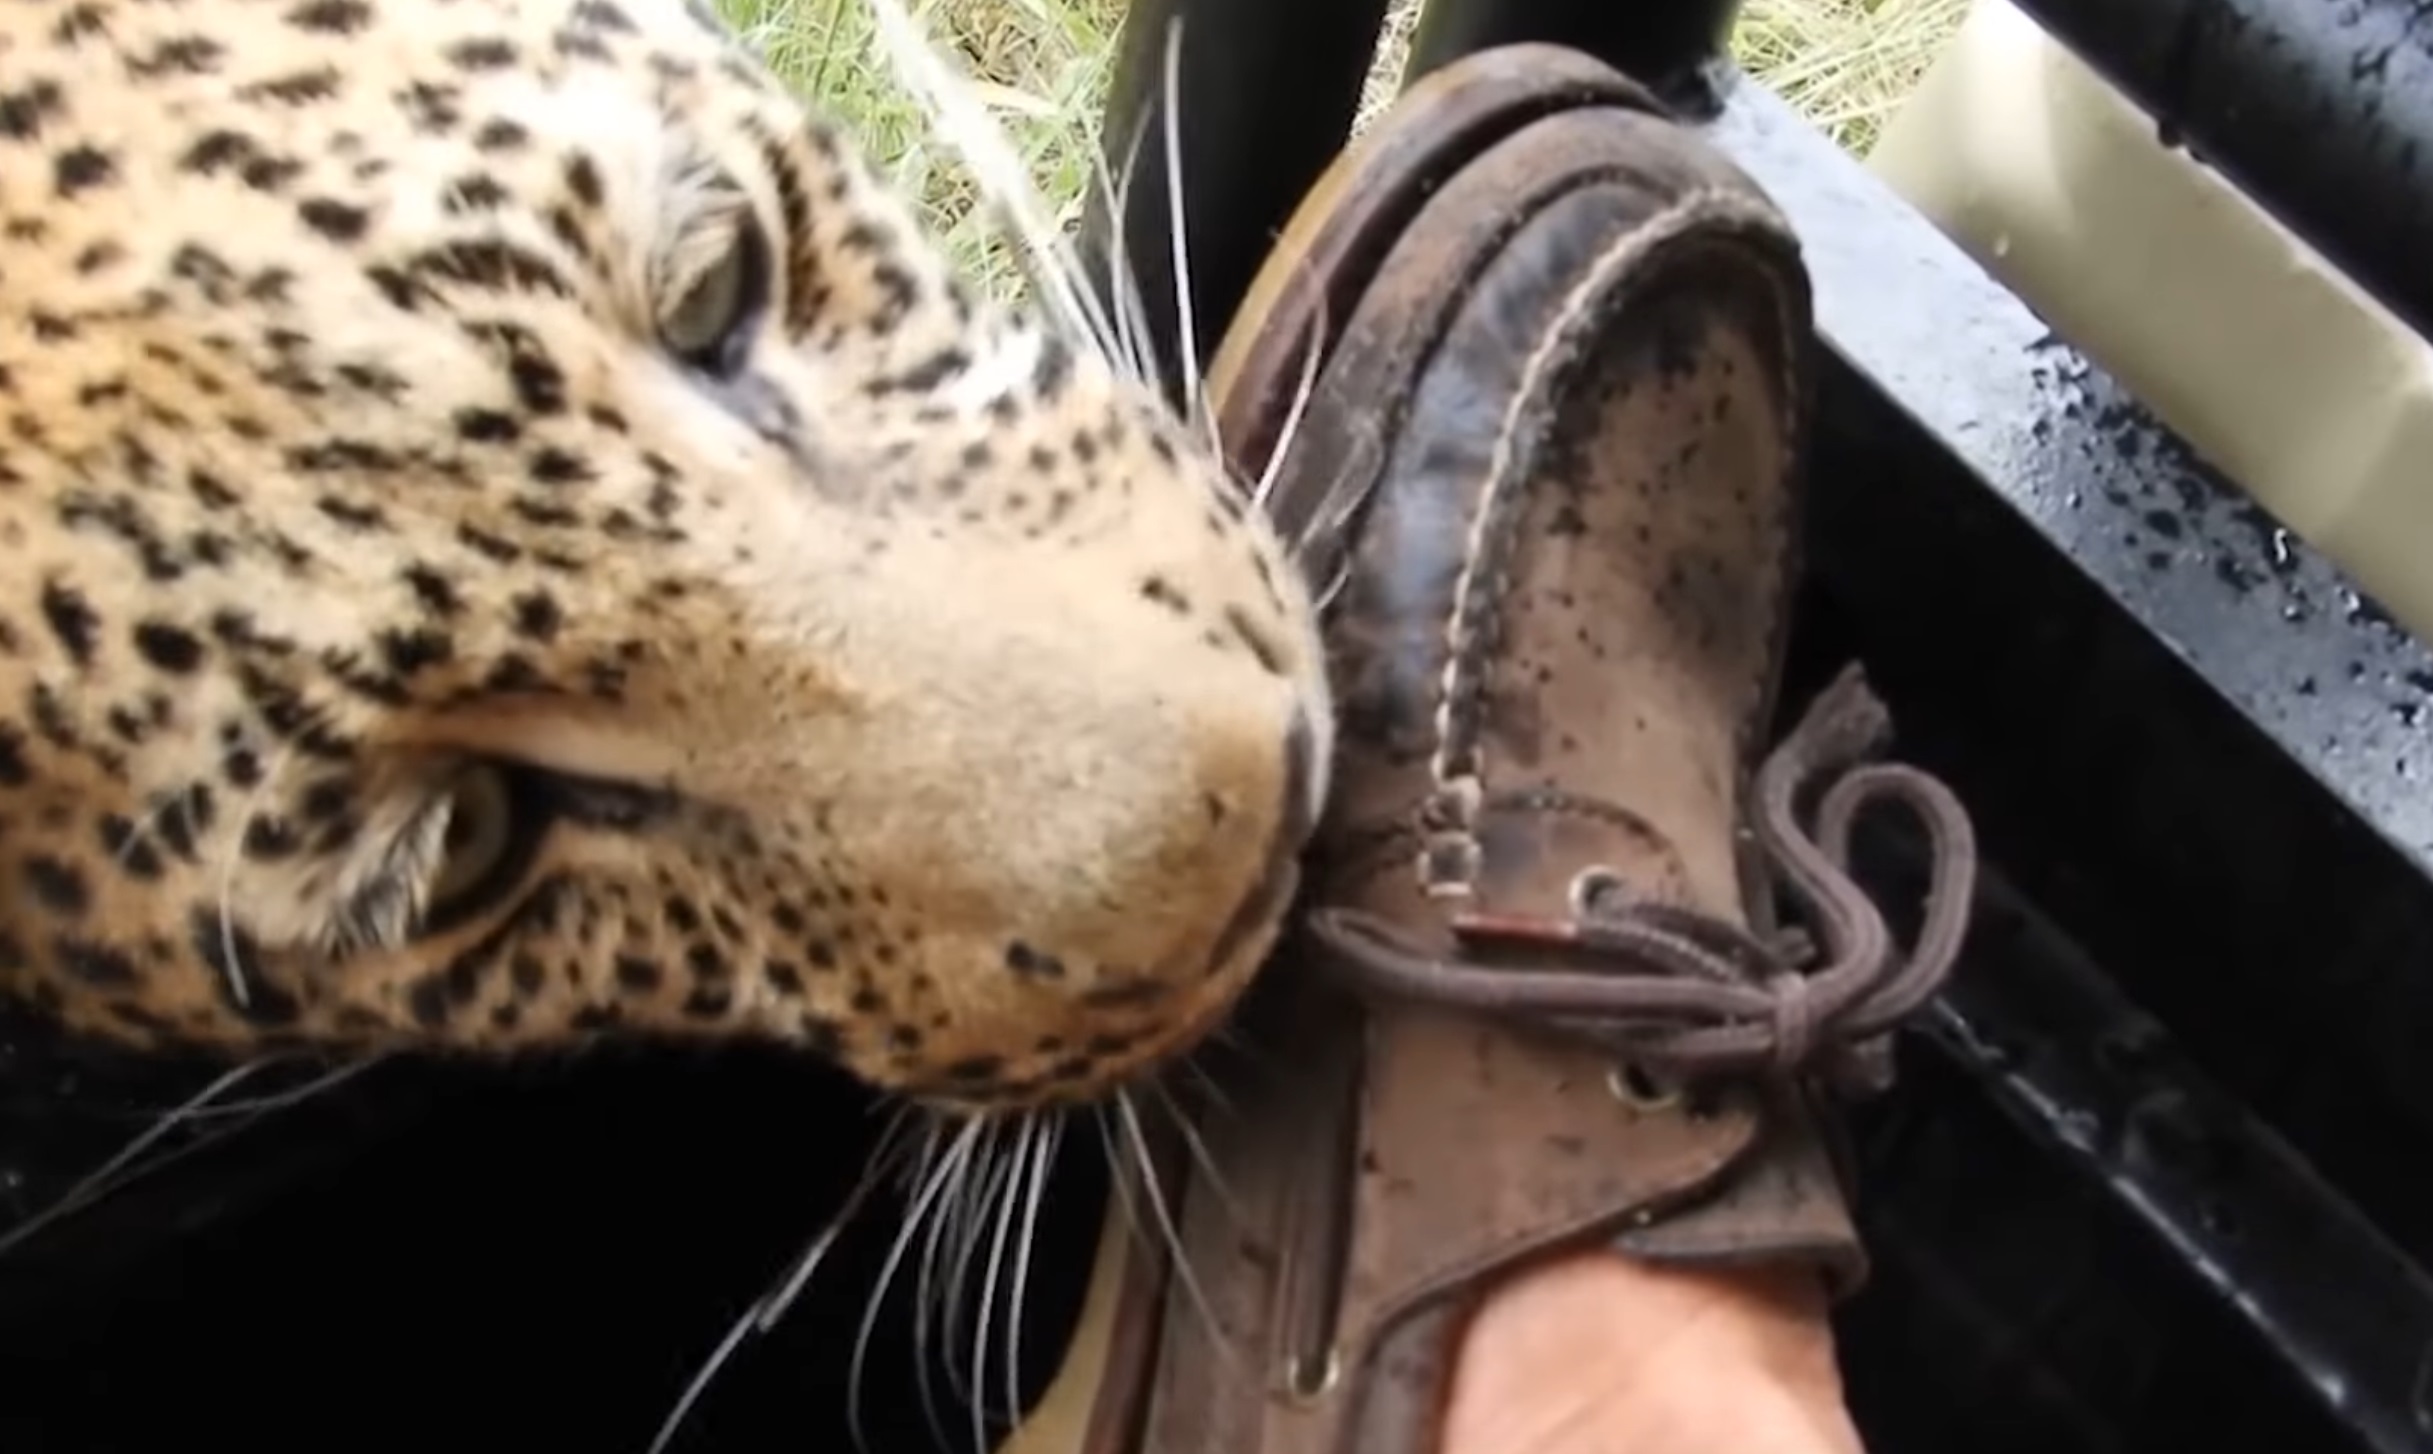 Intense Moments Between Tourist And Leopard